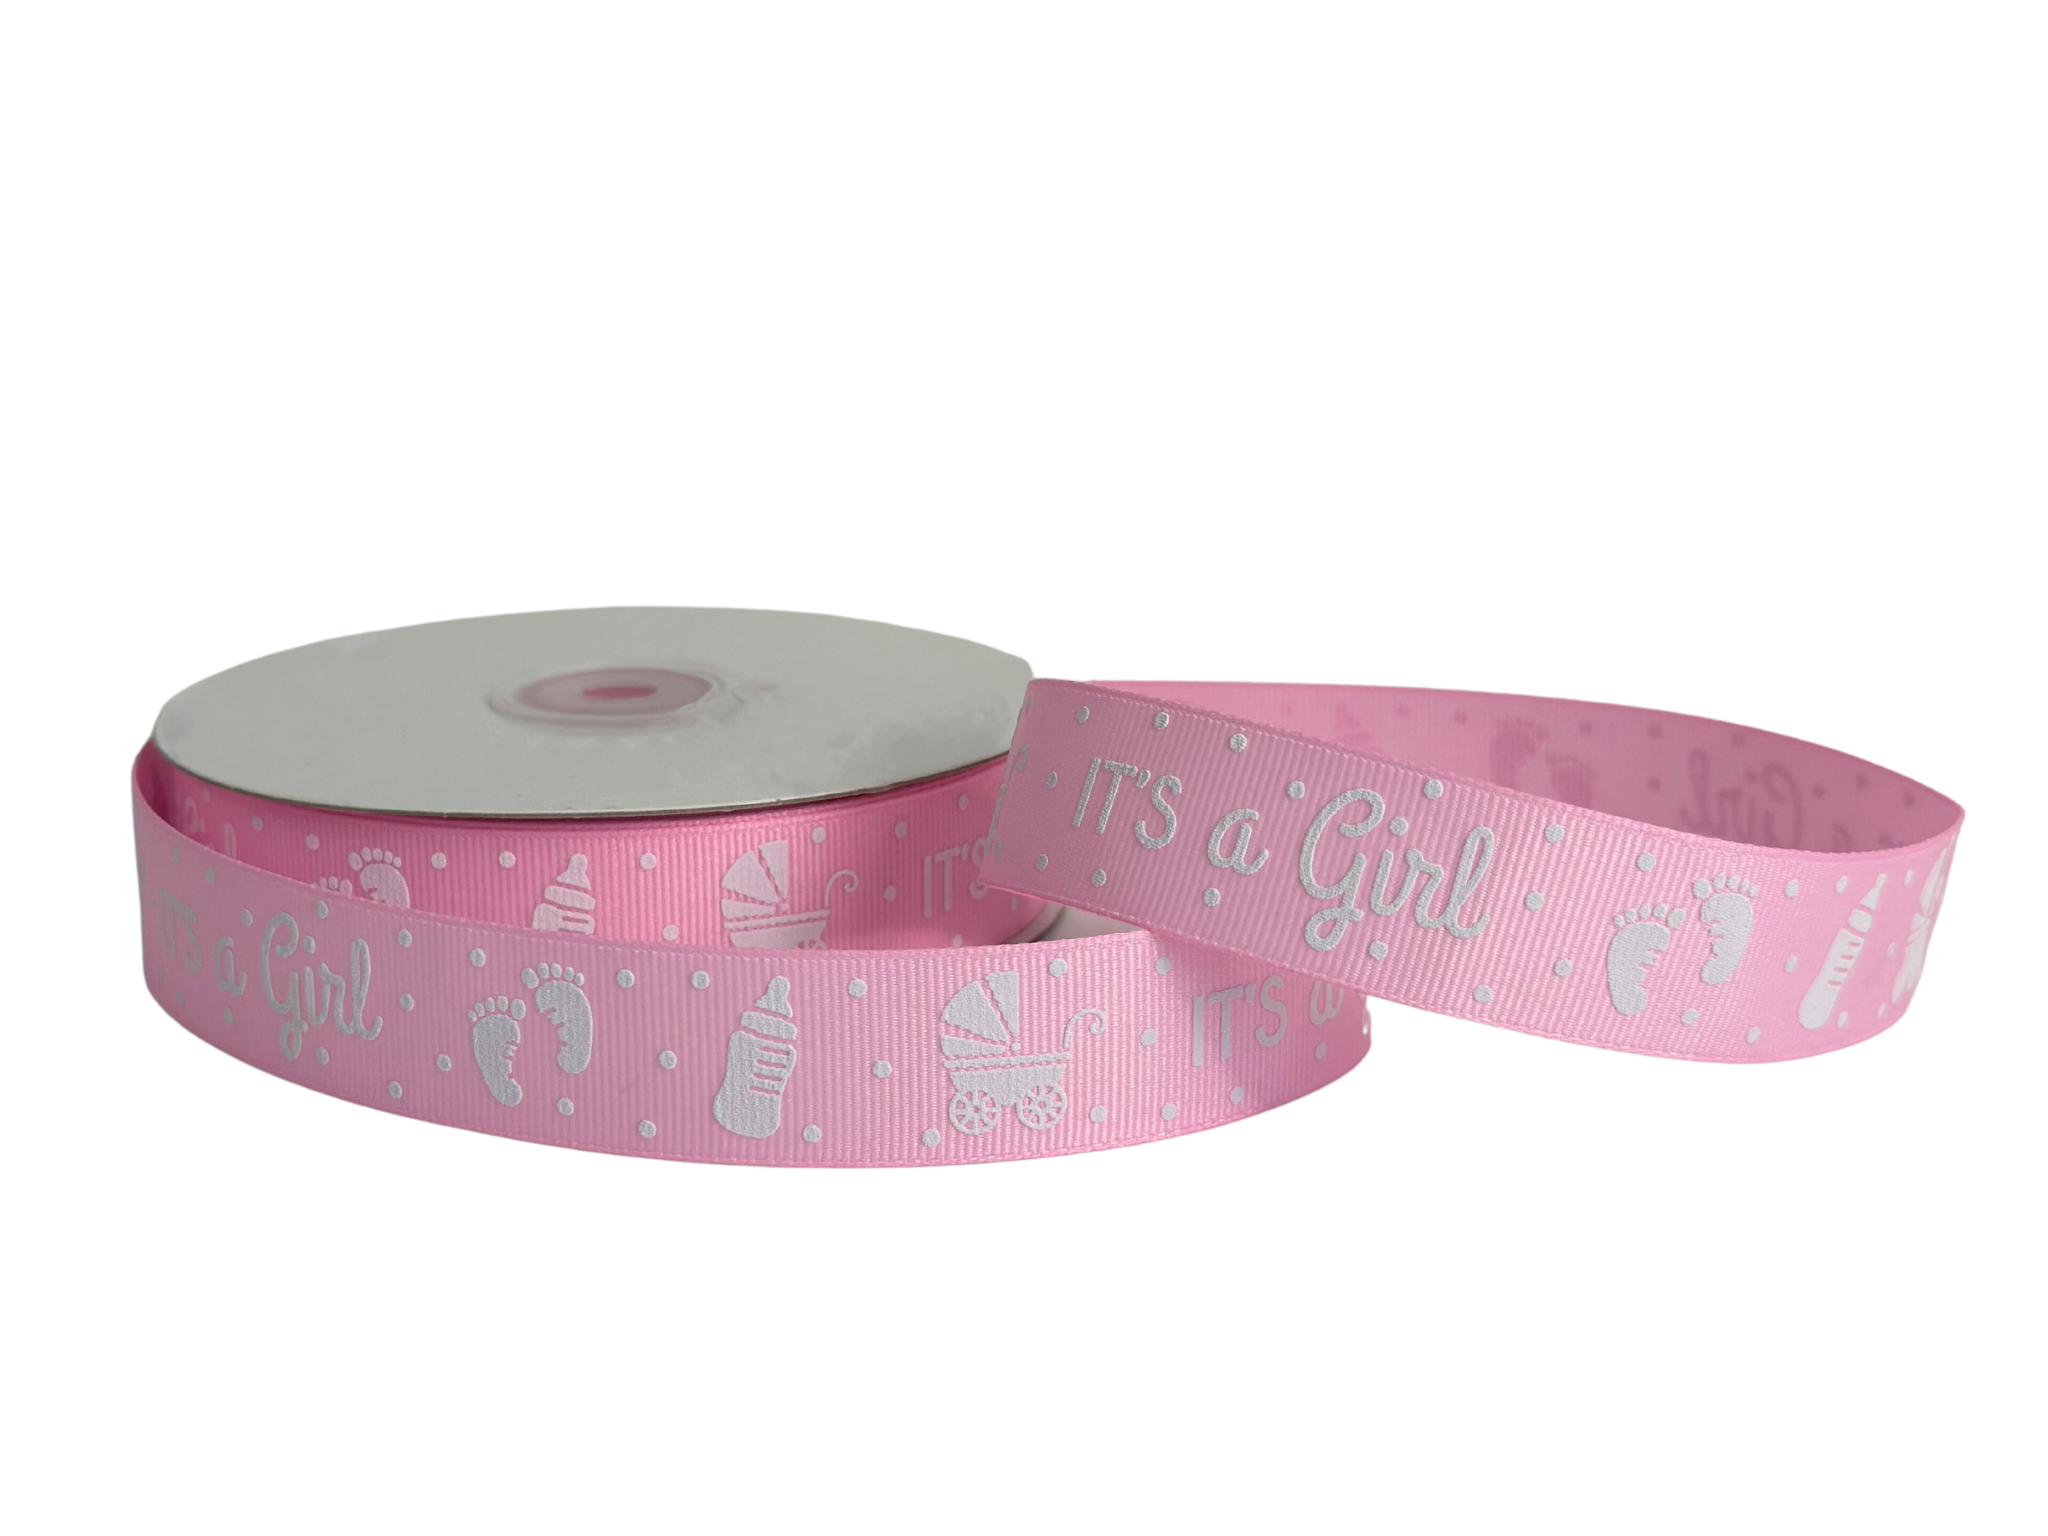 Baby Girl Gender Reveal Ribbon - 7/8 x 25 Yards, Pink Grosgrain Ribbon,  Baby Shower, It's a Girl, Polka Dots, Baby Banner